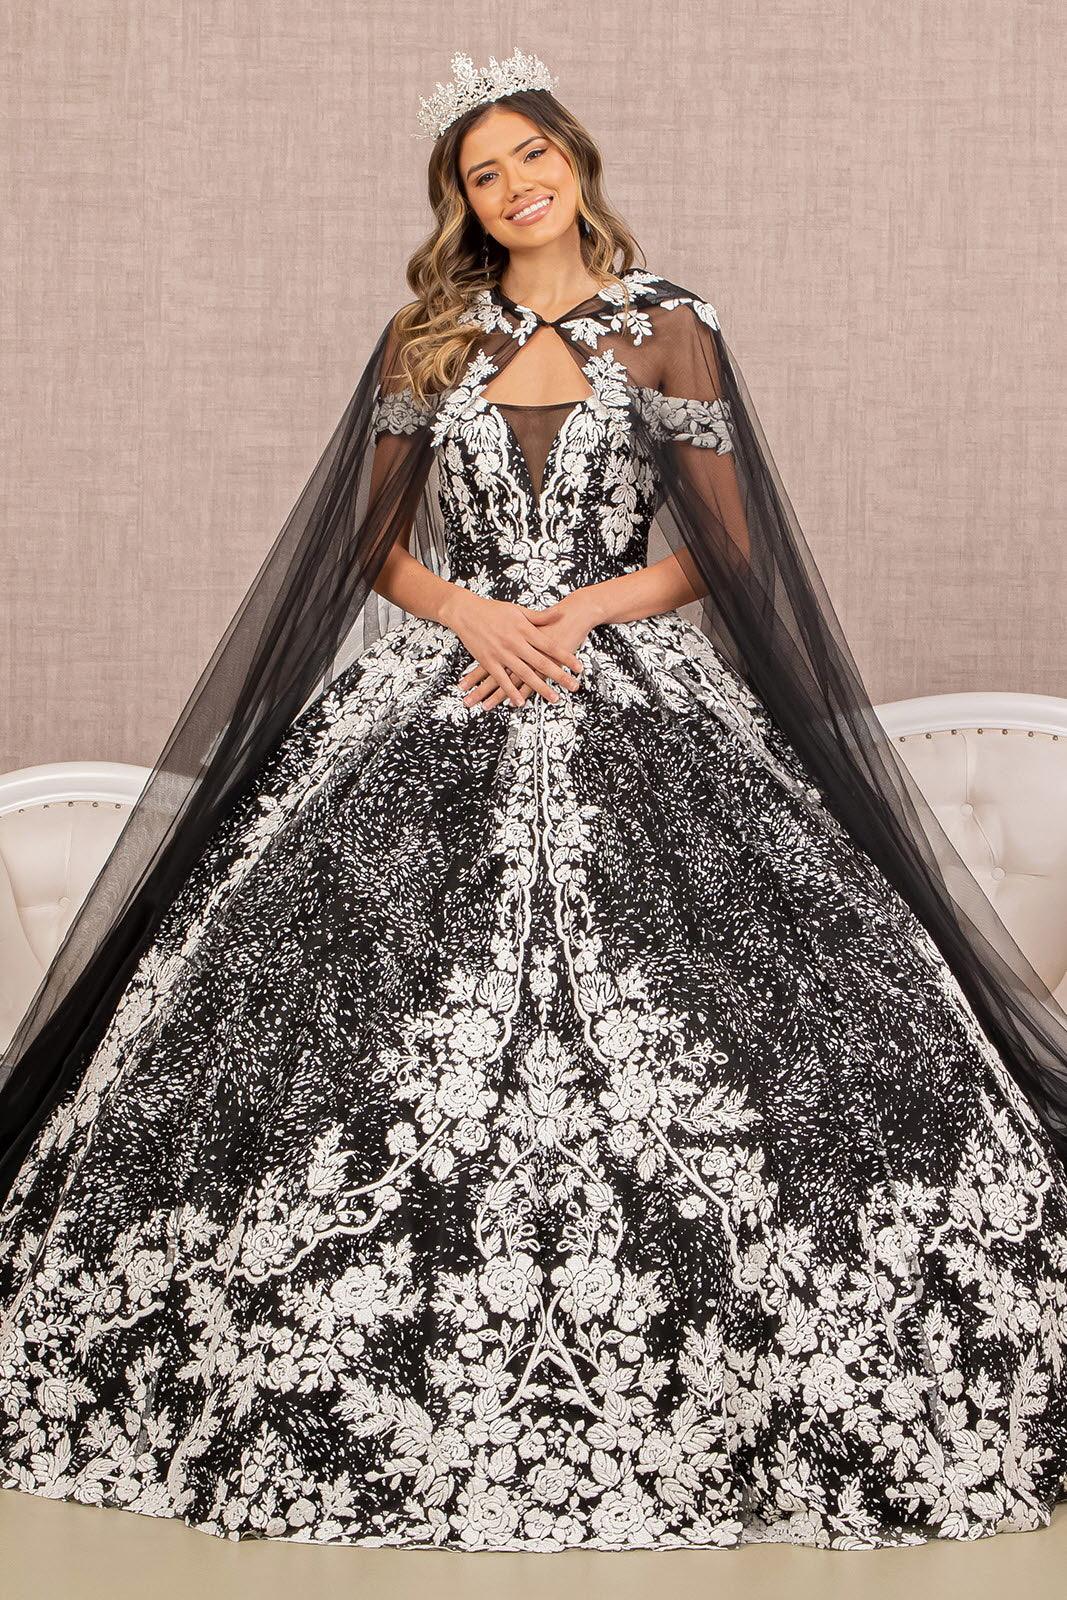 Ball Gowns | Full Skirt Gowns & Beaded to Satin Ball Gowns | Windsor